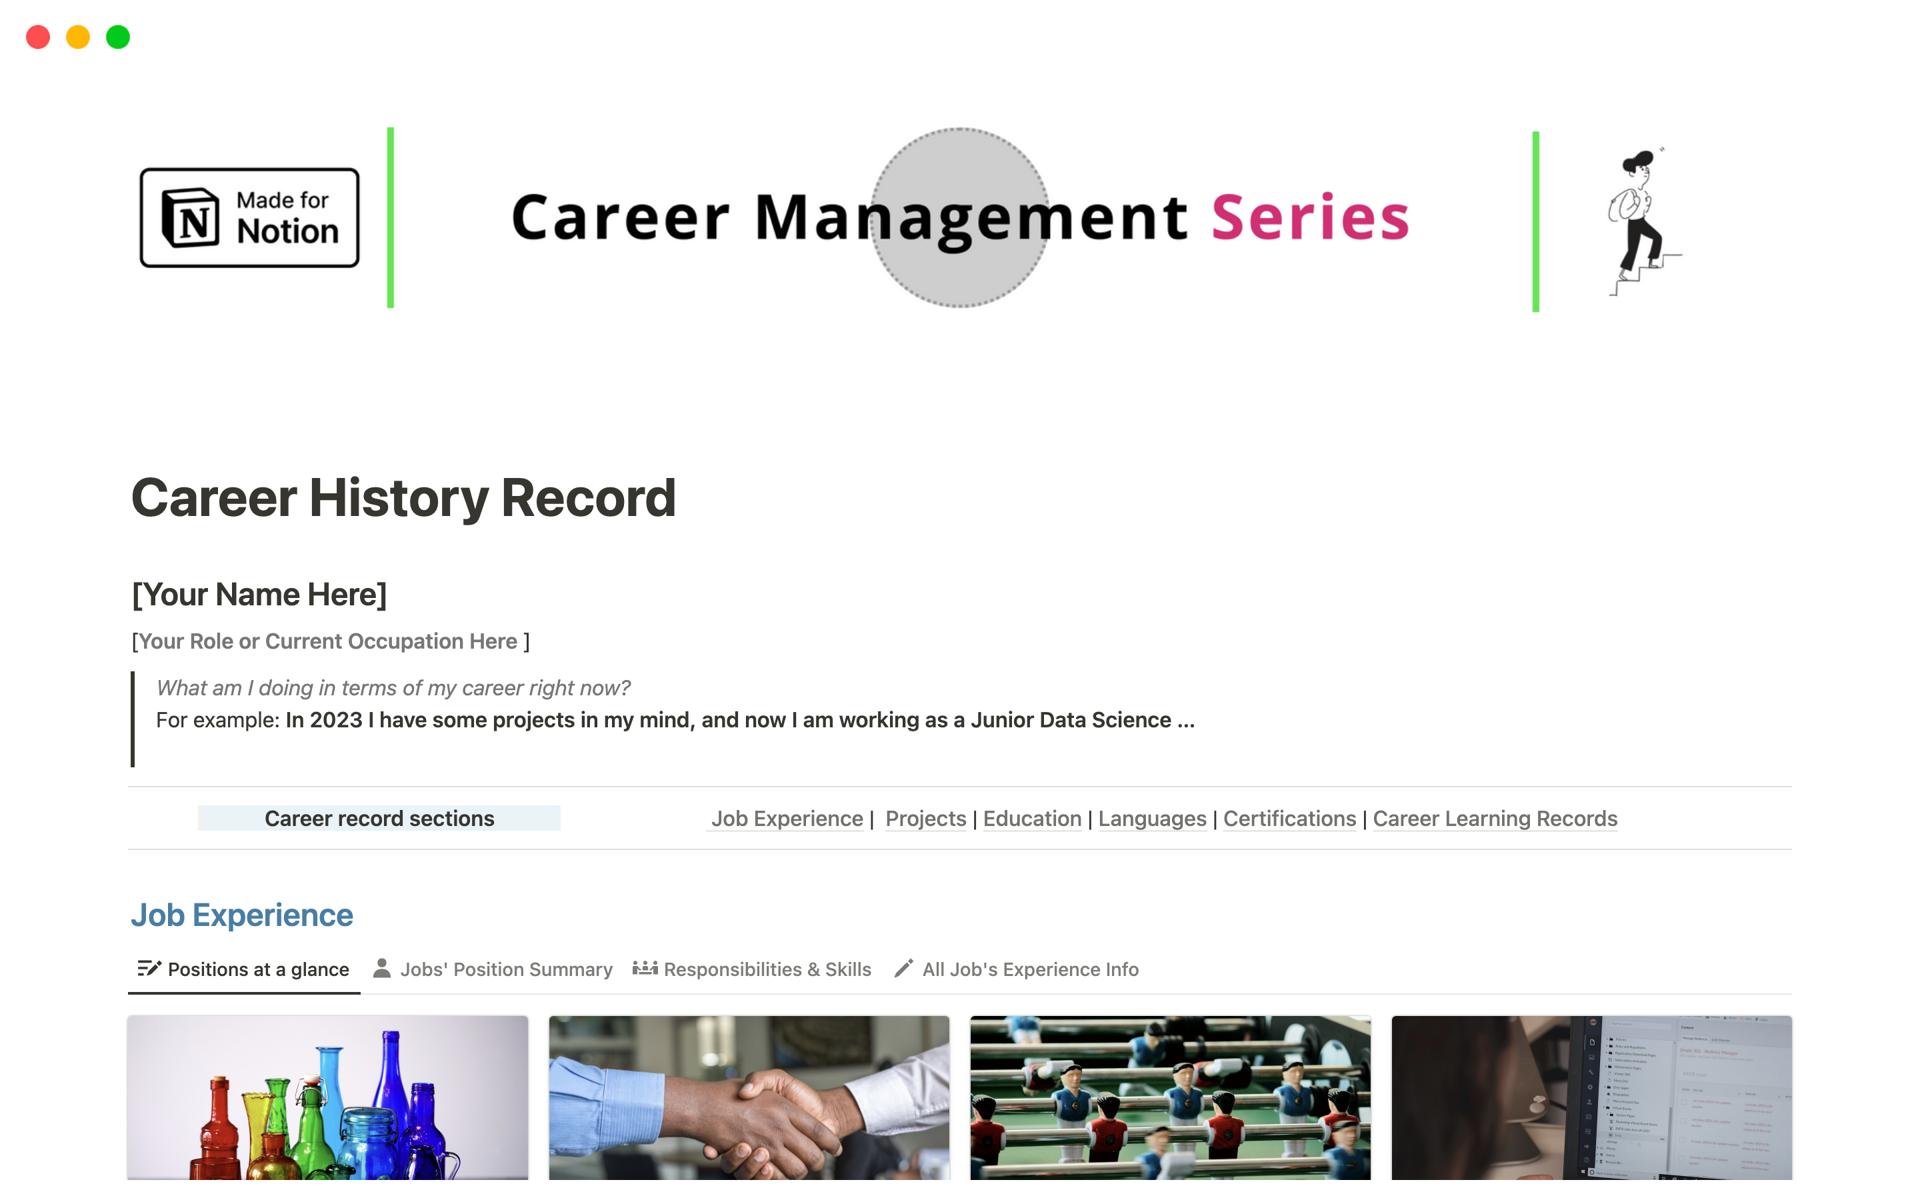 Crafted with an intuitive interface, this Career History Record Template allows you to easily chronicle your professional path.